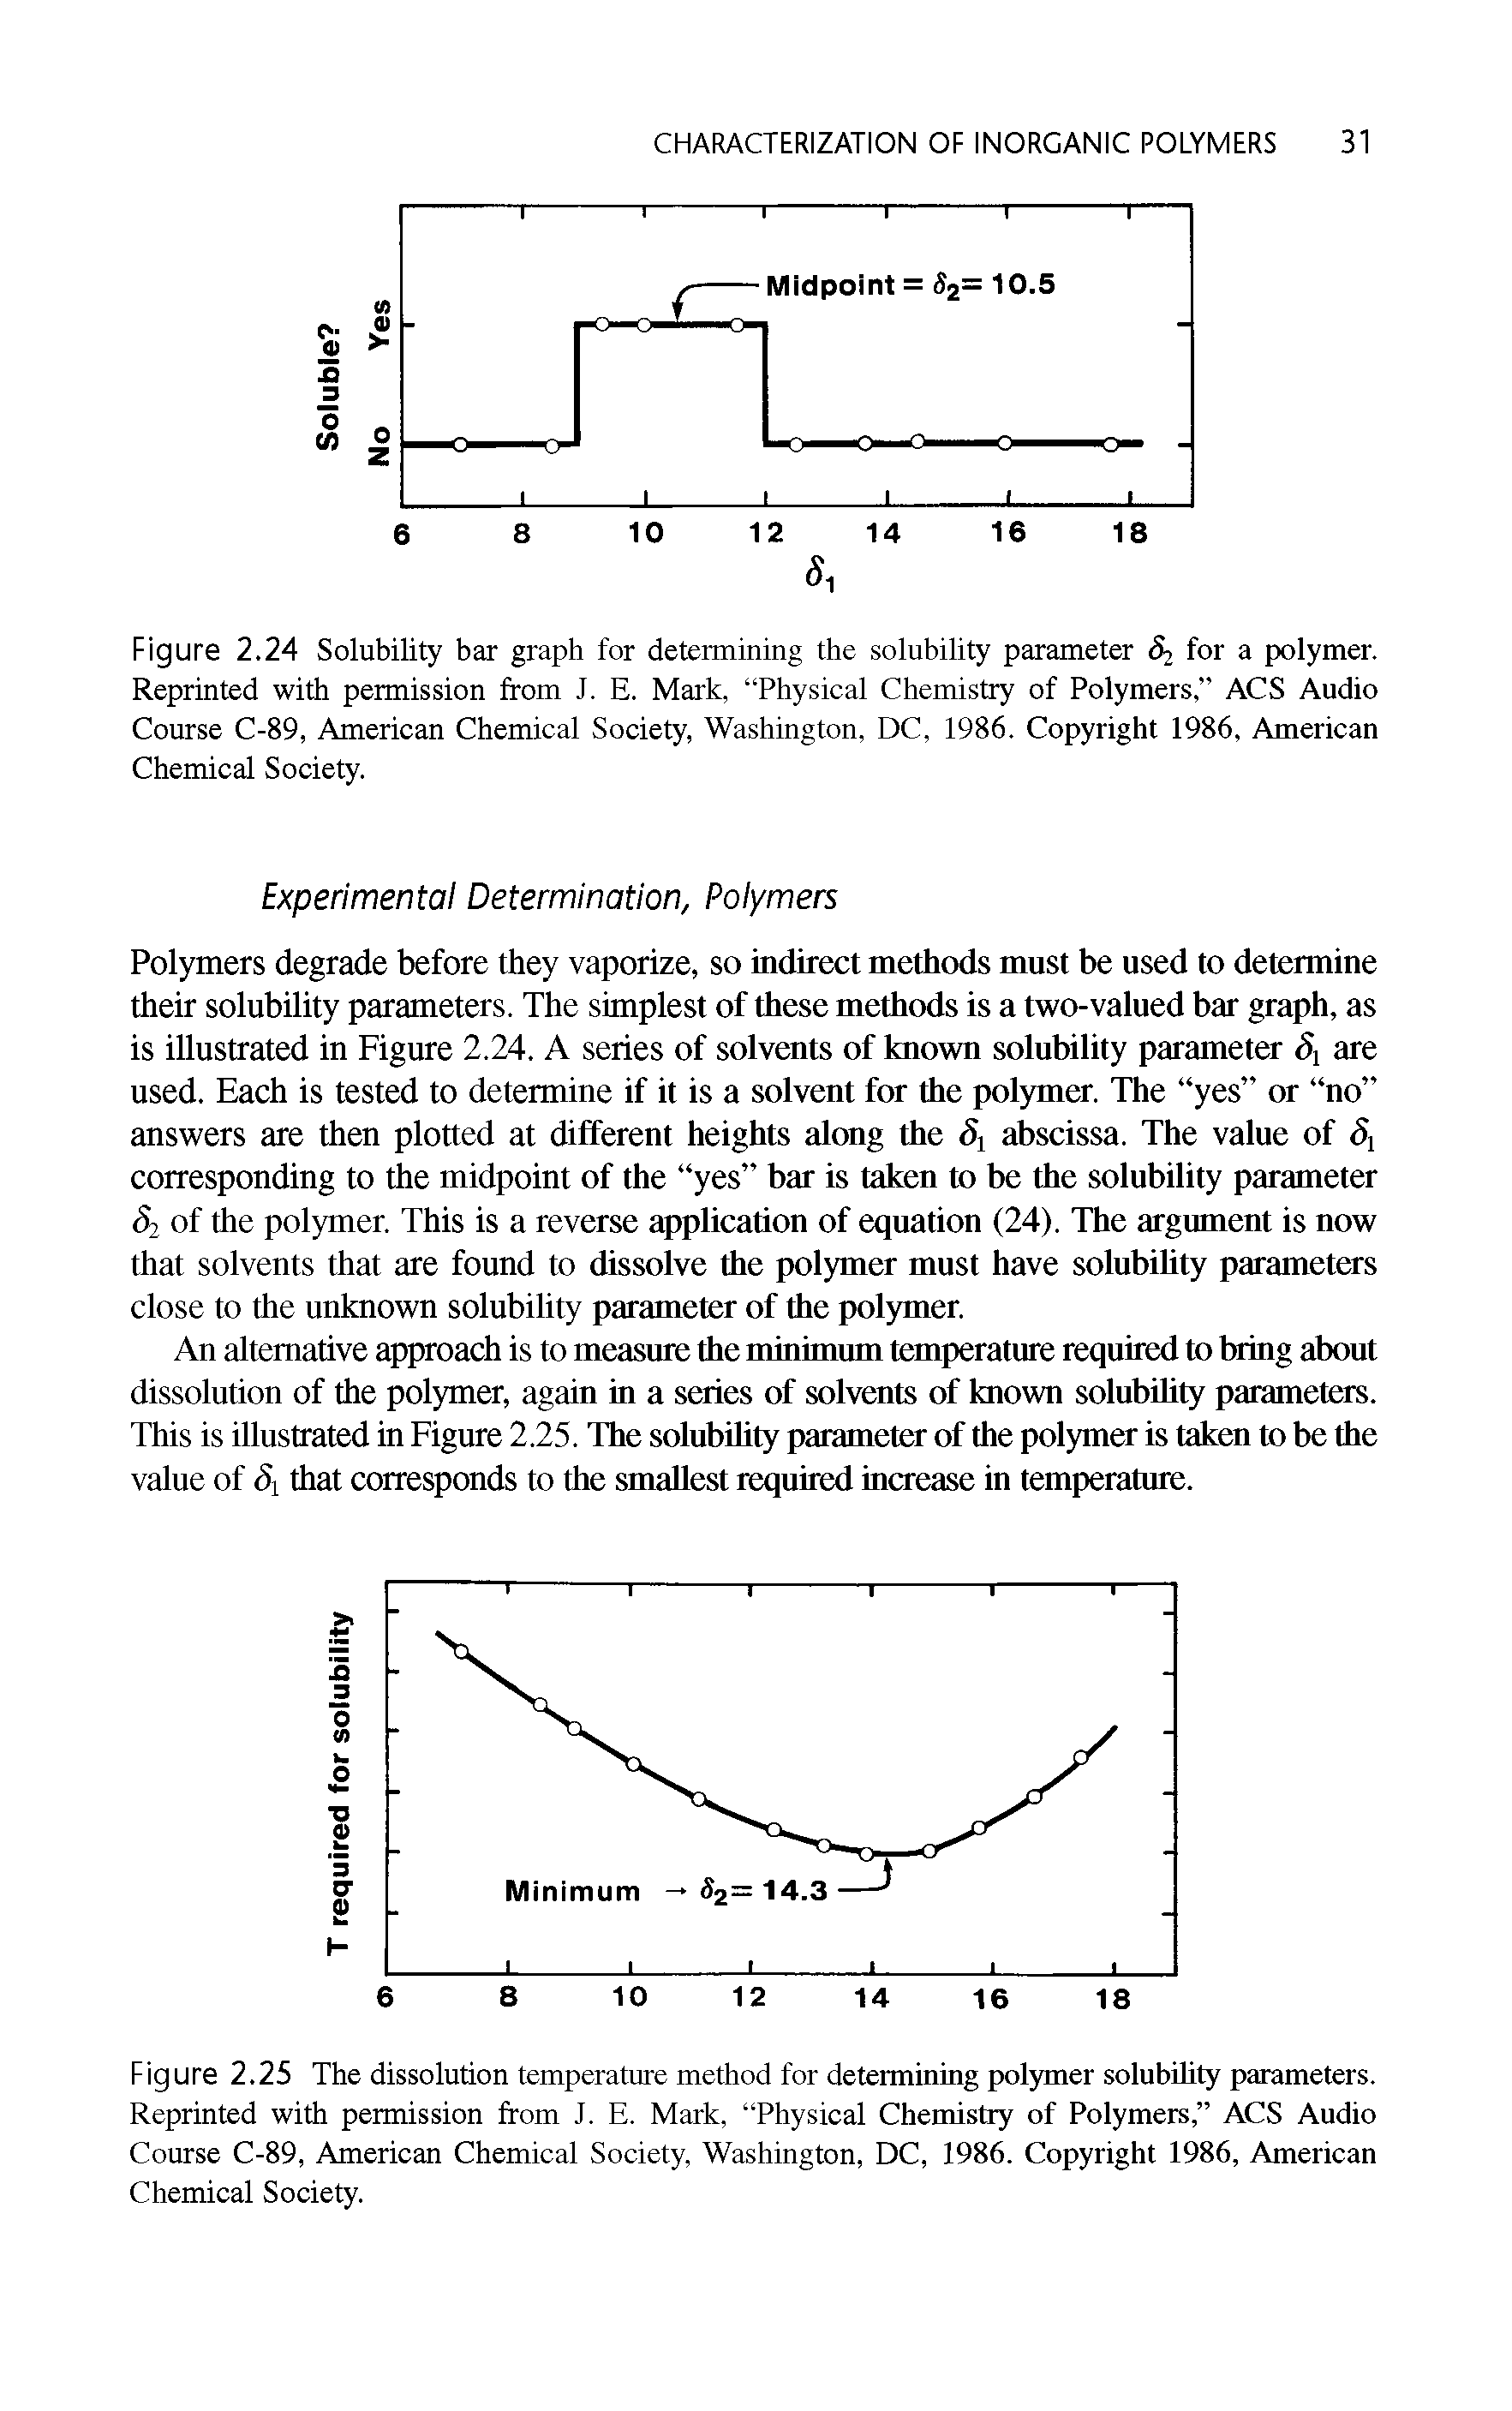 Figure 2.24 Solubility bar graph for determining the solubility parameter for a polymer. Reprinted with permission from J. E. Mark, Physical Chemistry of Polymers, ACS Audio Course C-89, American Chemical Society, Washington, DC, 1986. Copyright 1986, American Chemical Society.